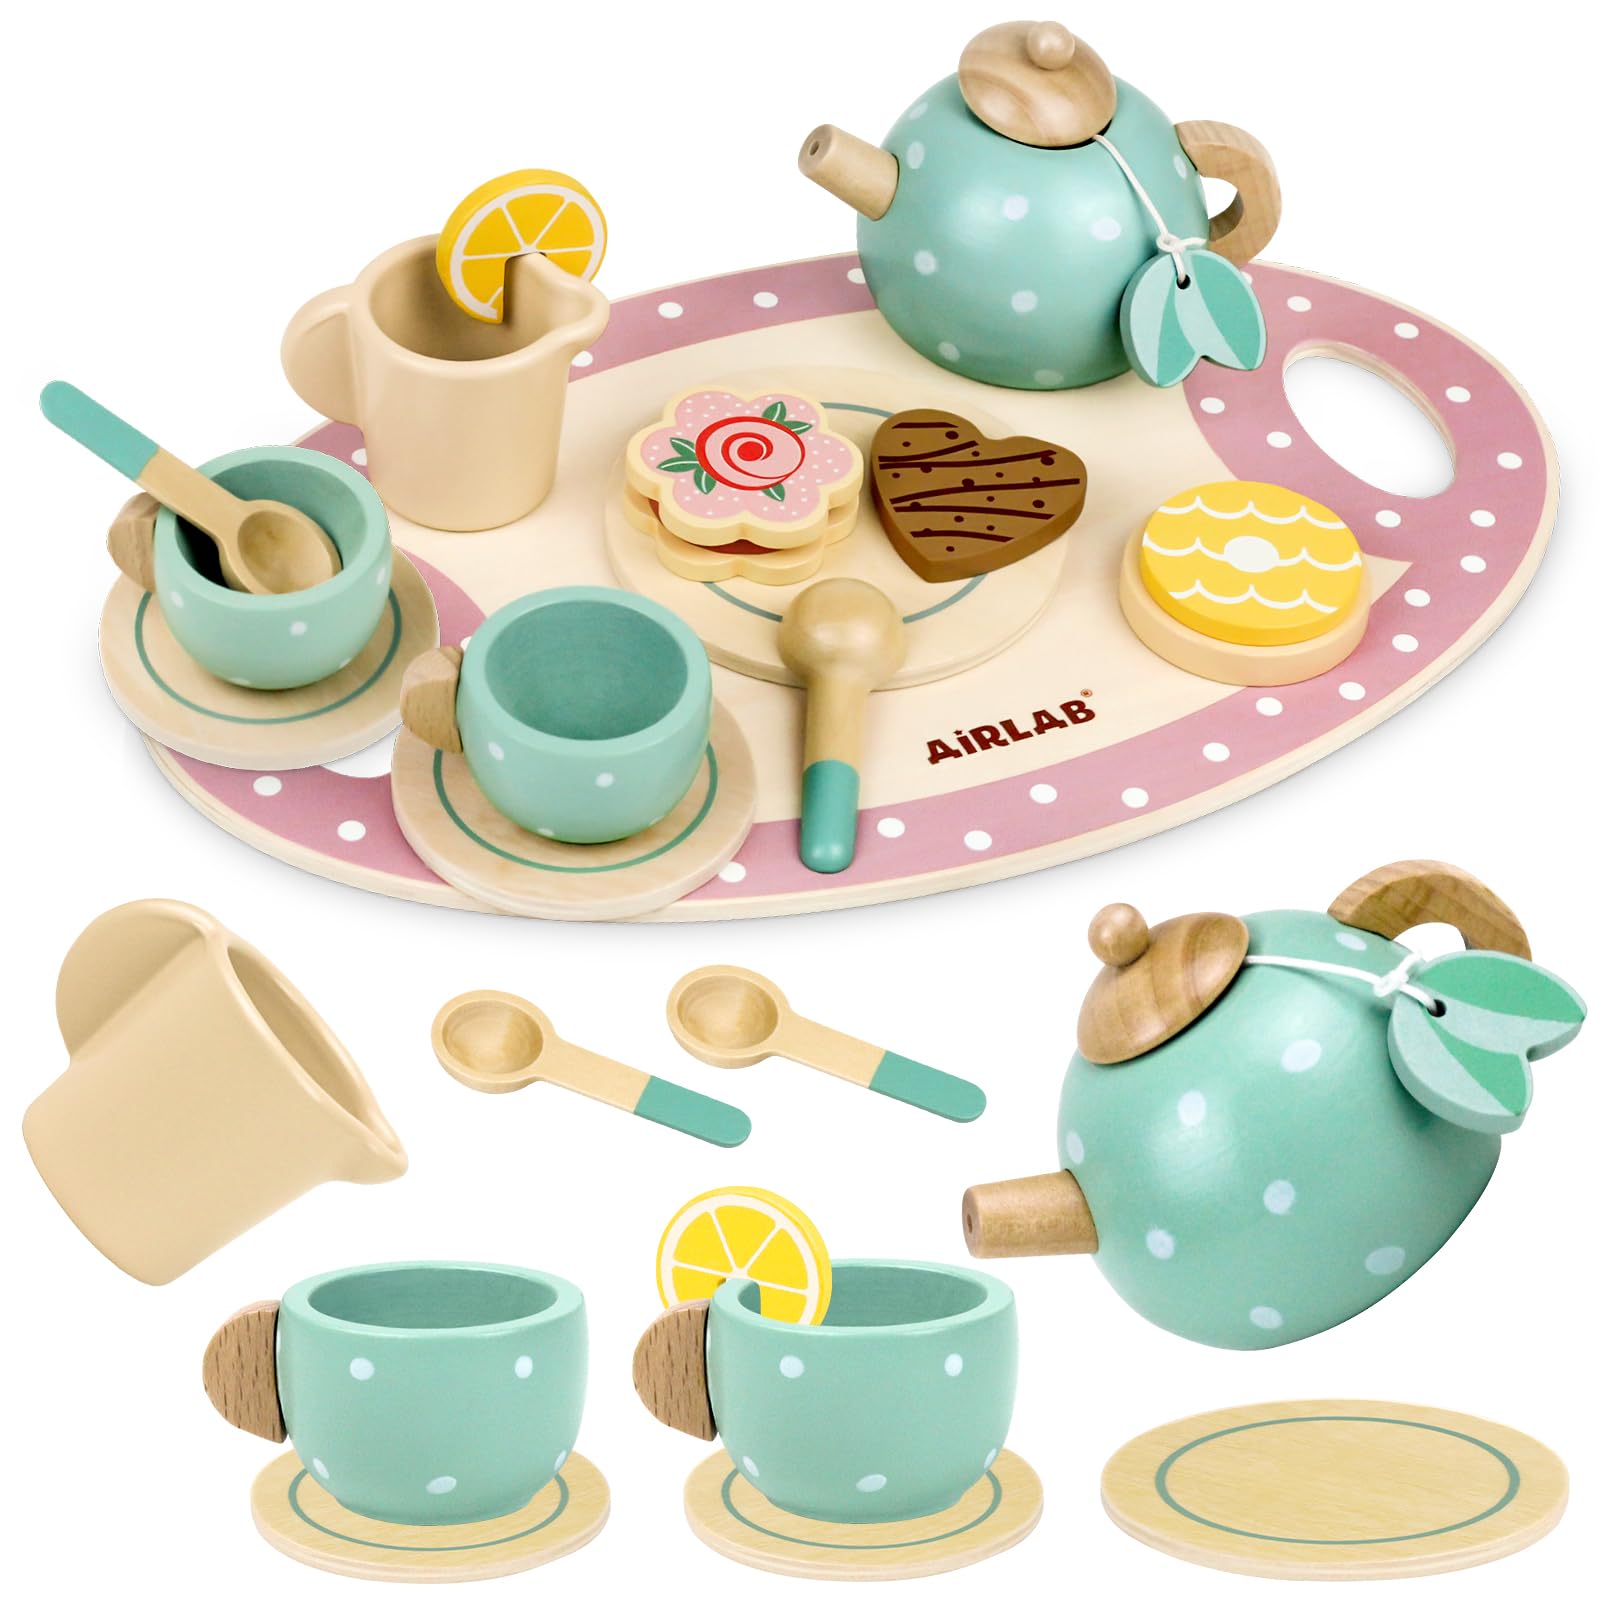 Airlab Wooden Tea Set for Little Girls Play Food Pretend Play Kitchen Accessories for 3 4 5 Years Old Girls and Boys Toddler Princess T